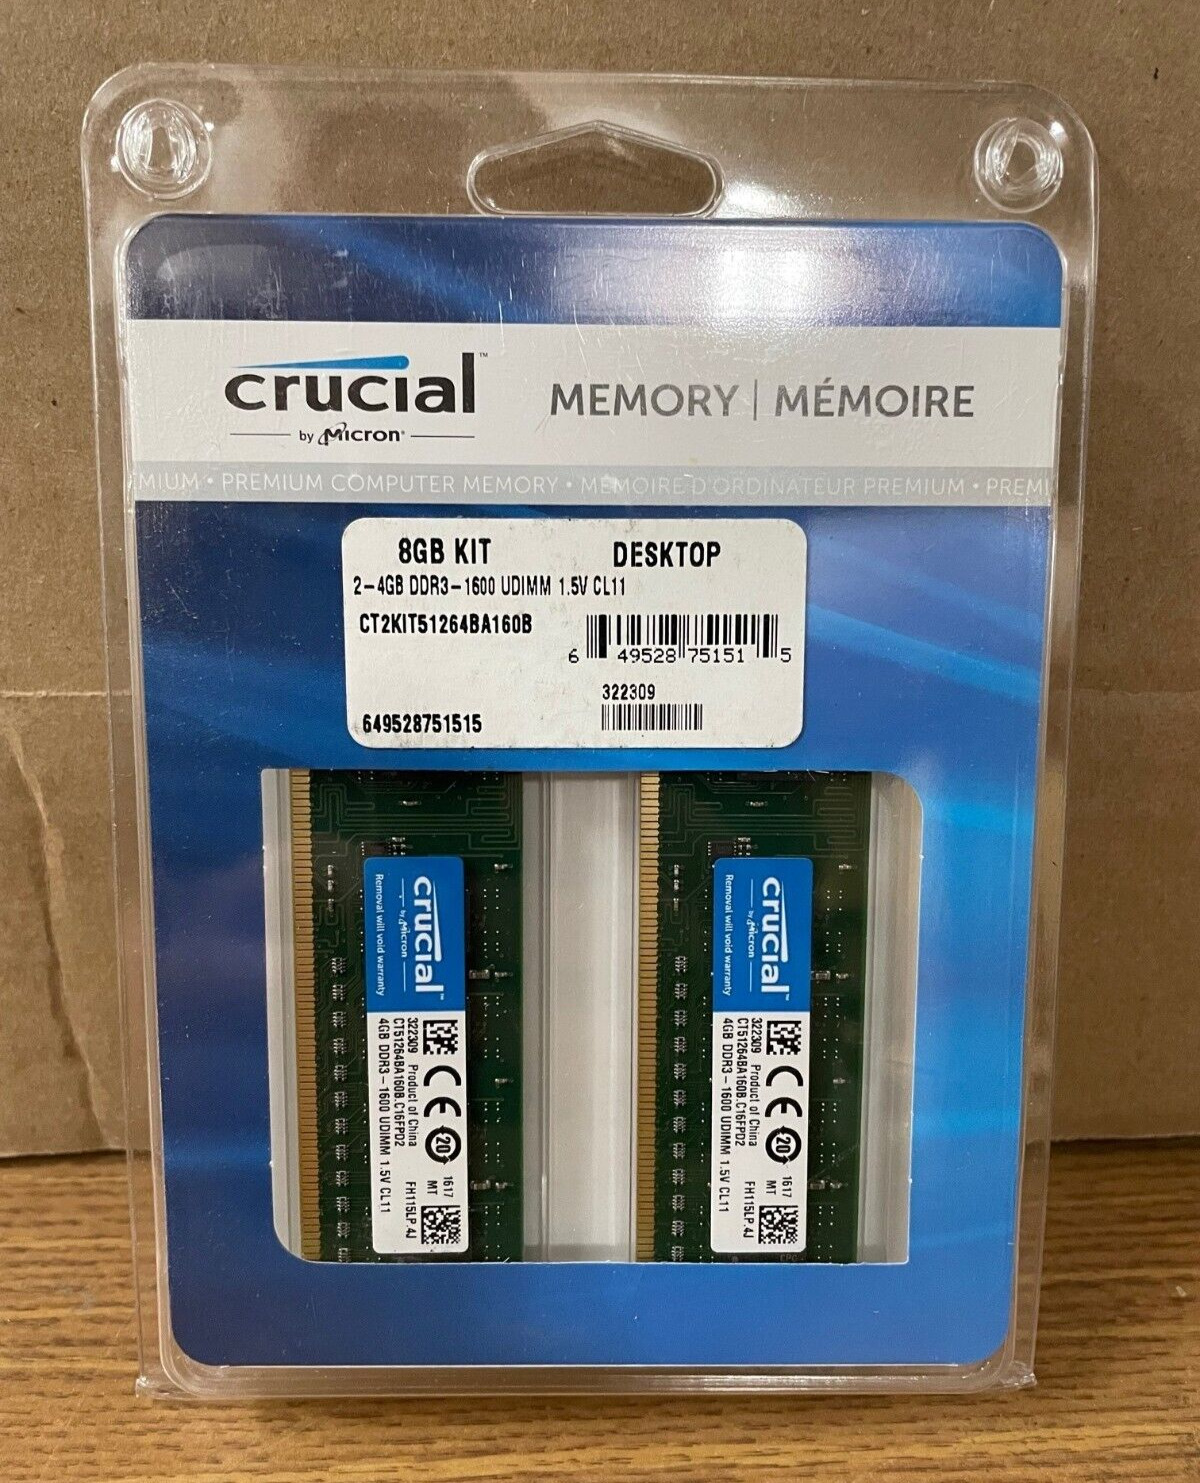 CRUCIAL by MICRON CRM-9128 MAC COMPATIBLE MEMORY 2 X 4GB